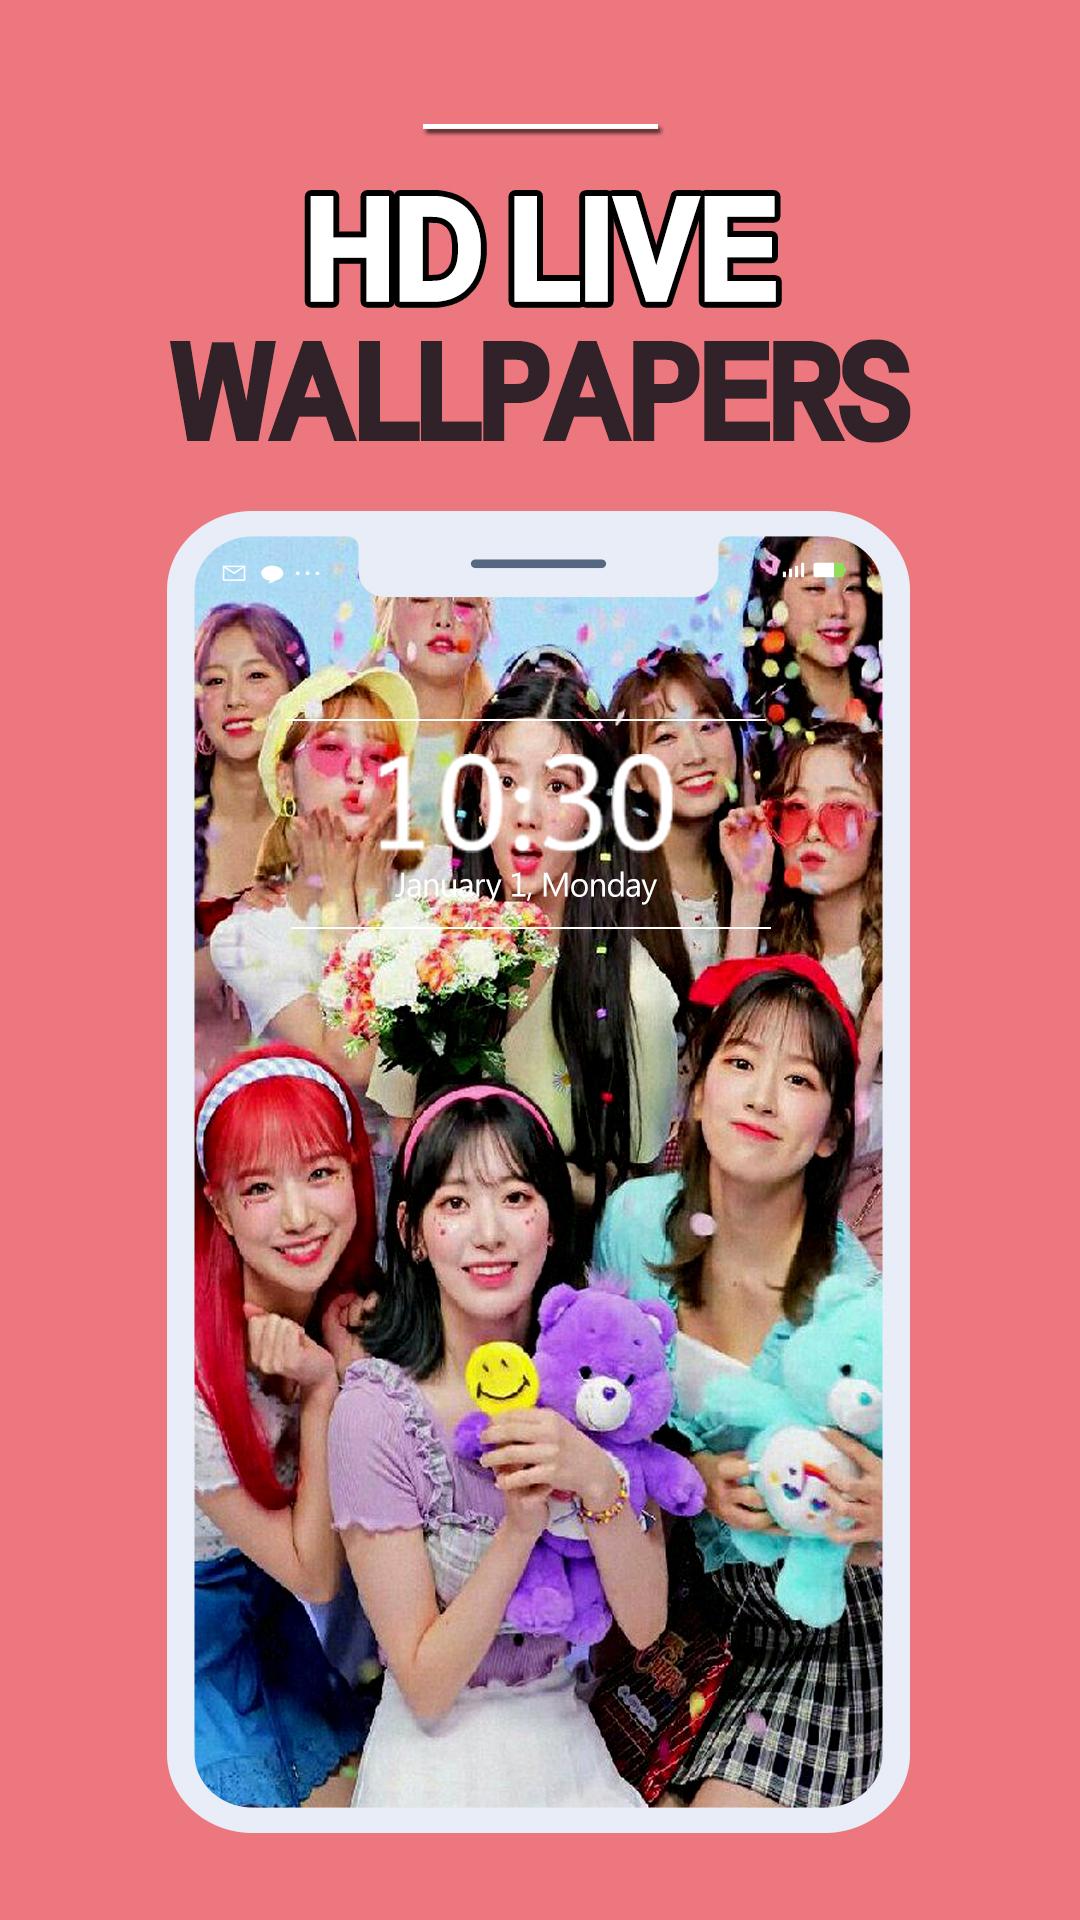 Izone Hd Live Wallpaper Iz One Phone Wallpaper For Android Apk Download